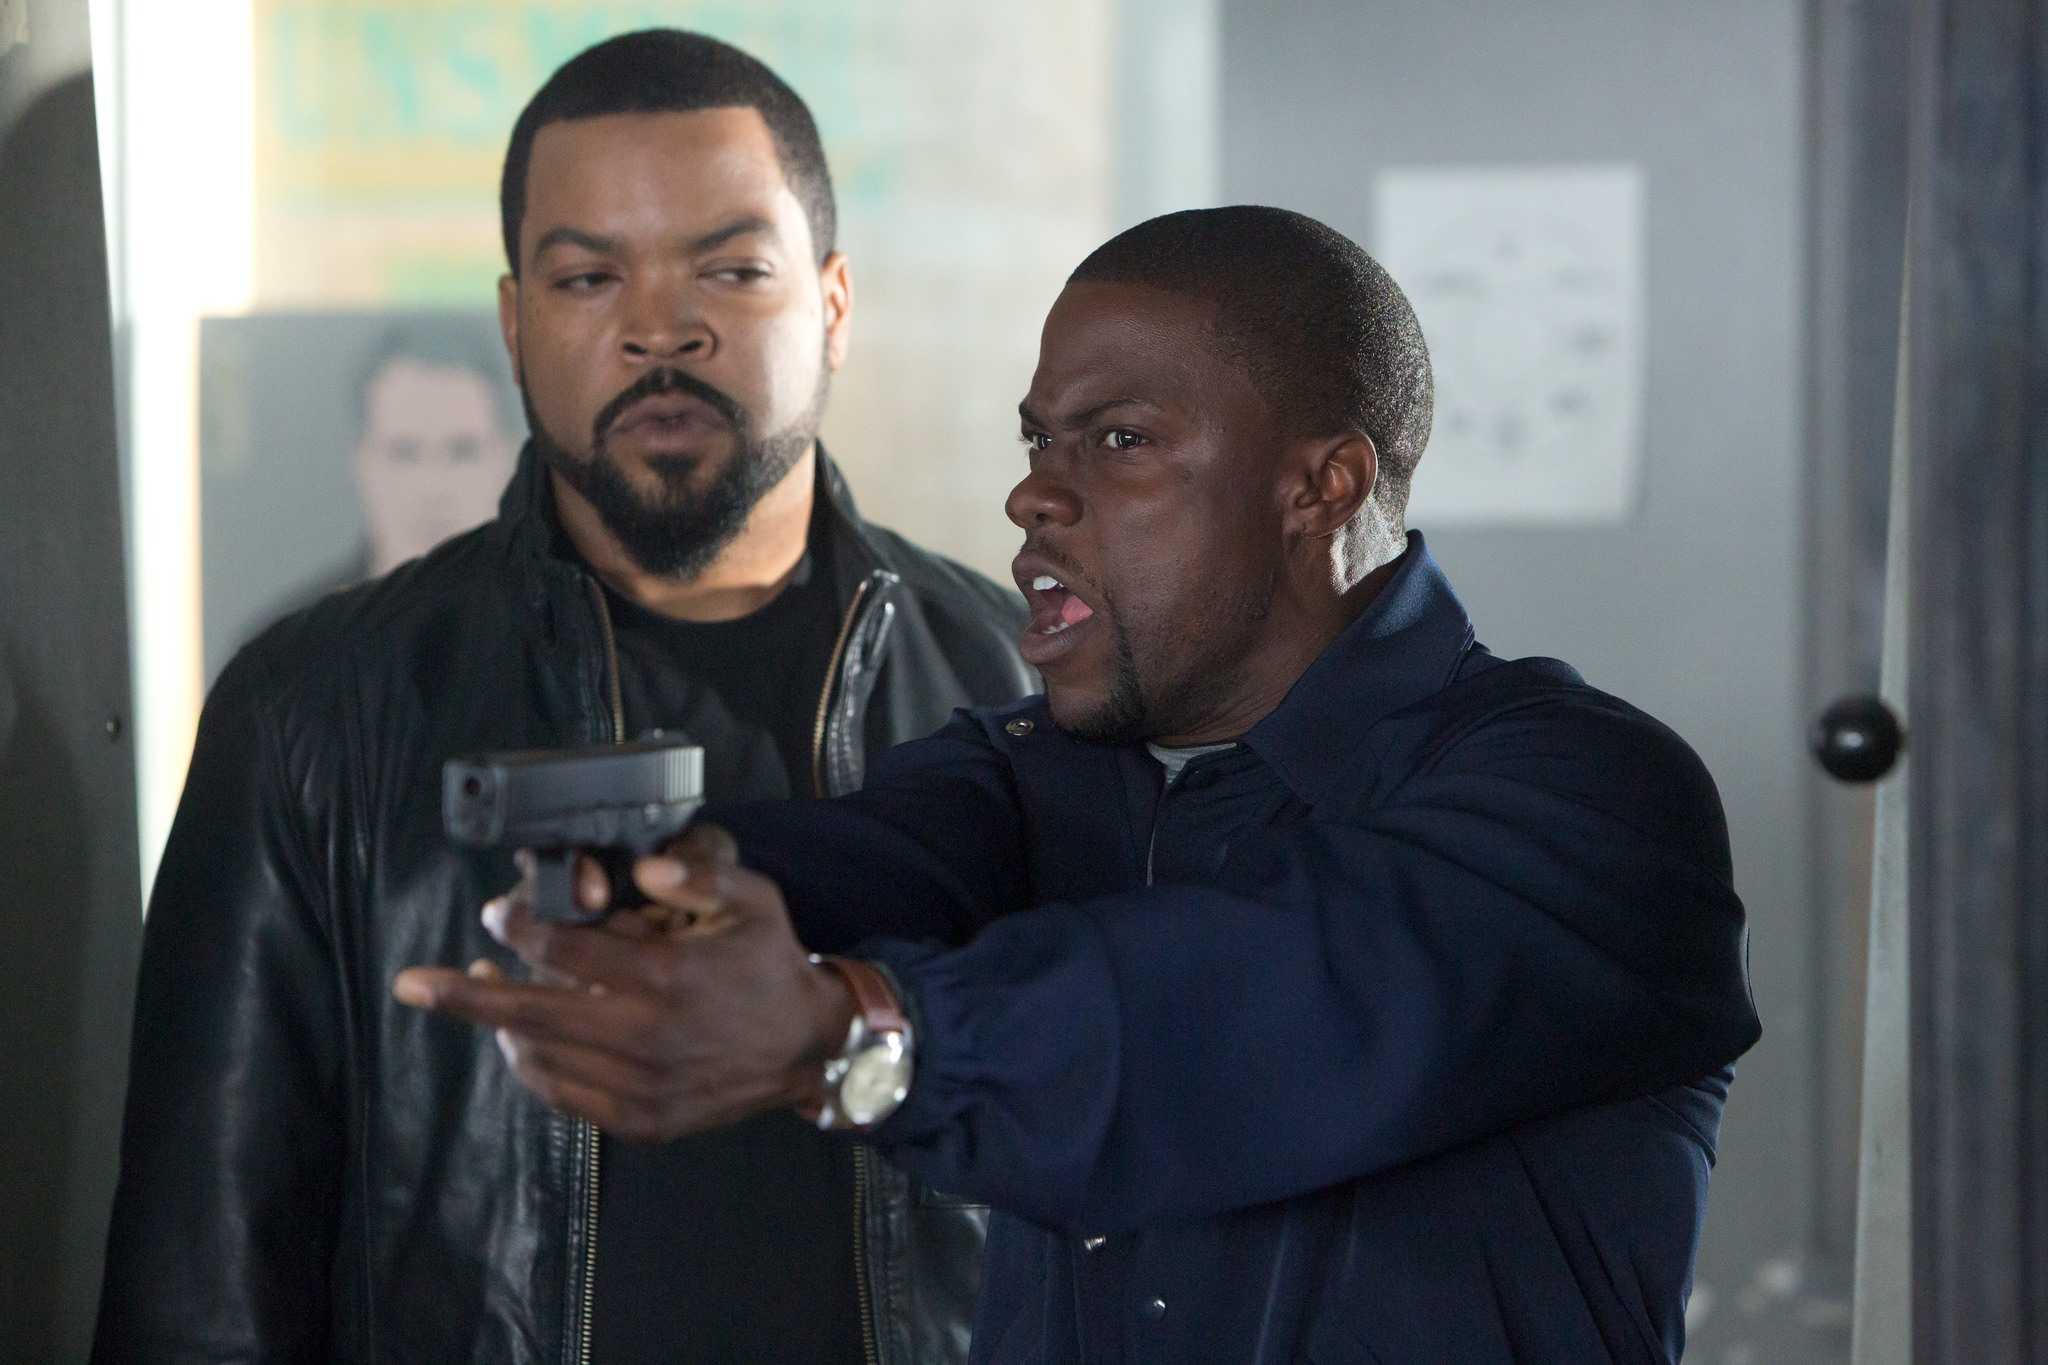 facebook.comIce Cube and Kevin Hart star in the new comedy ‘Ride Along.’ The movie opened at number one at the box office.